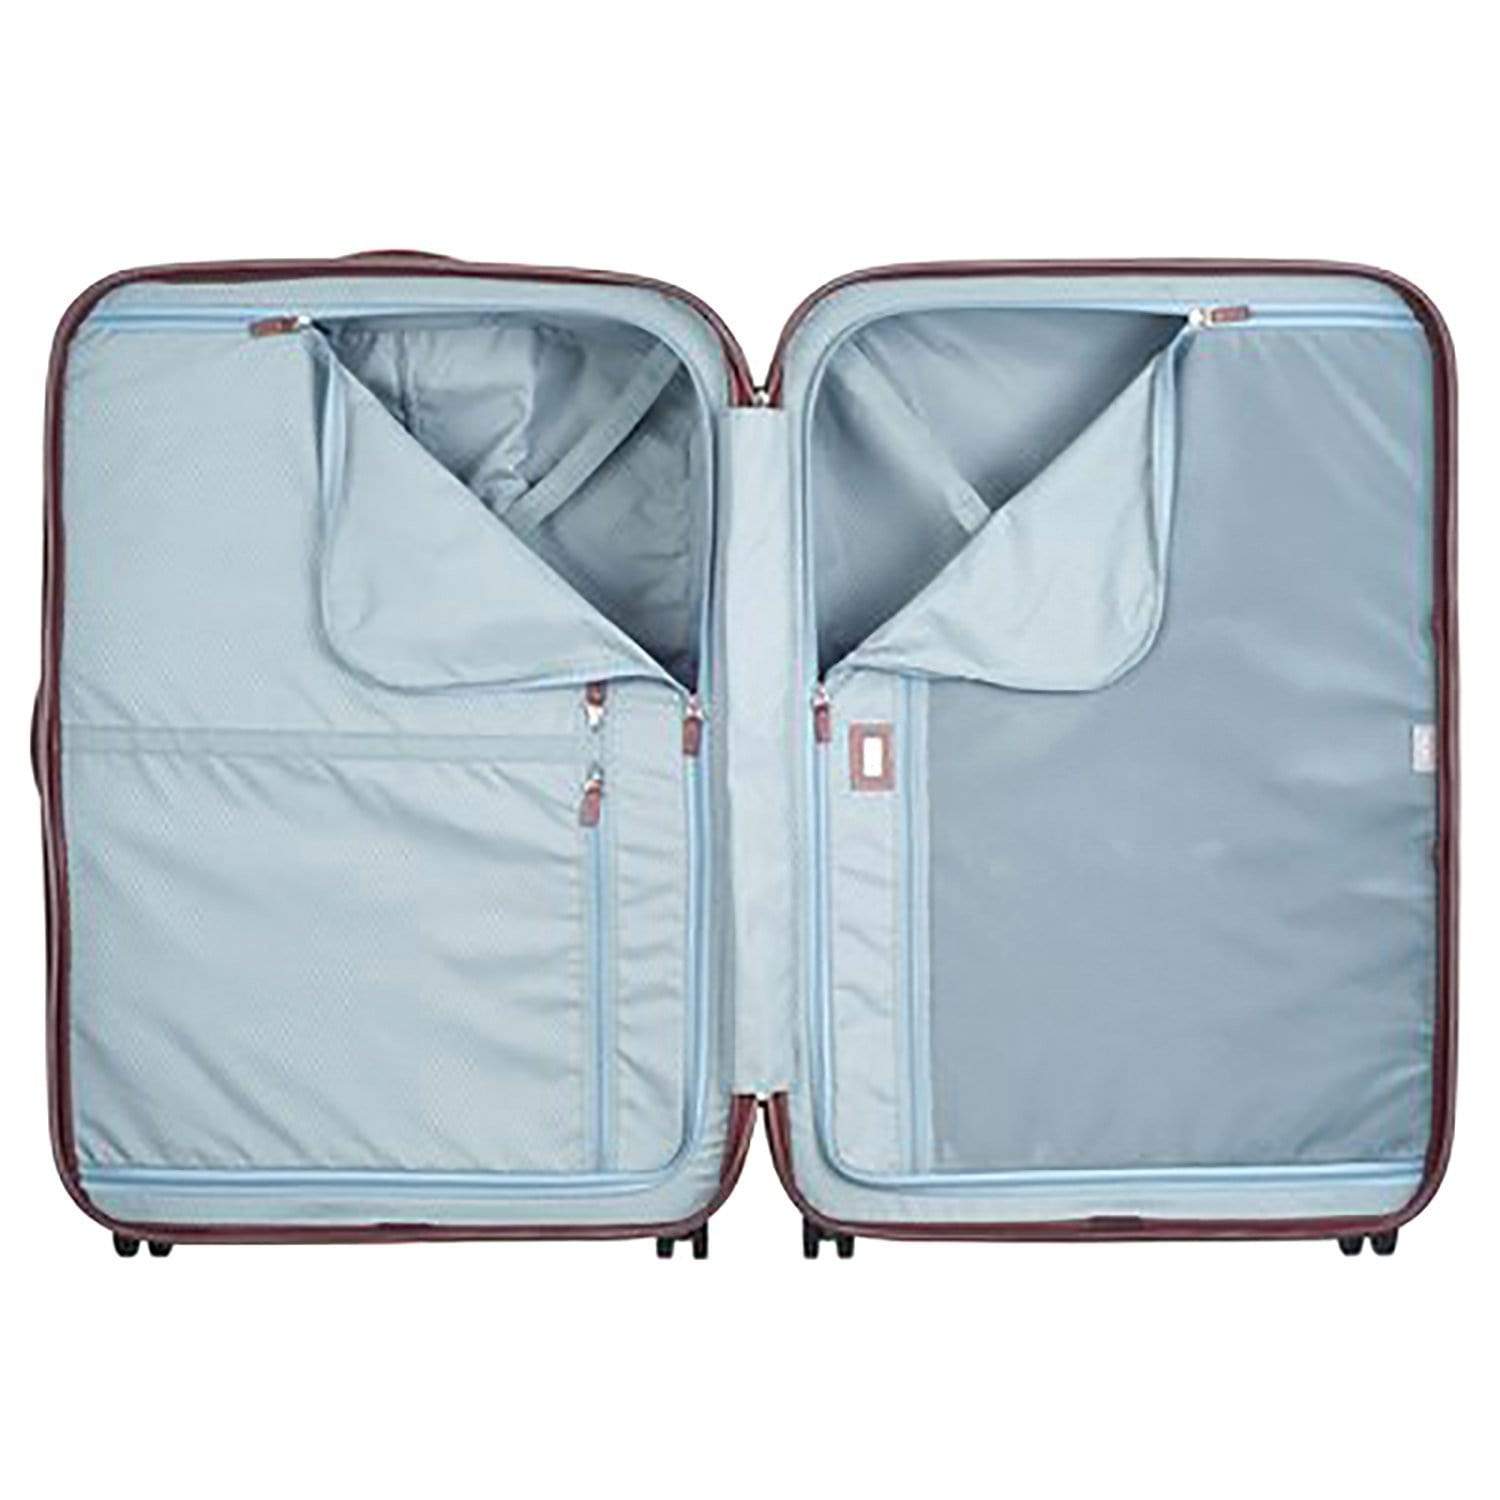 Delsey Chatelet Air Trolley Bag - Silver - 00167282111 SILVER - Jashanmal Home